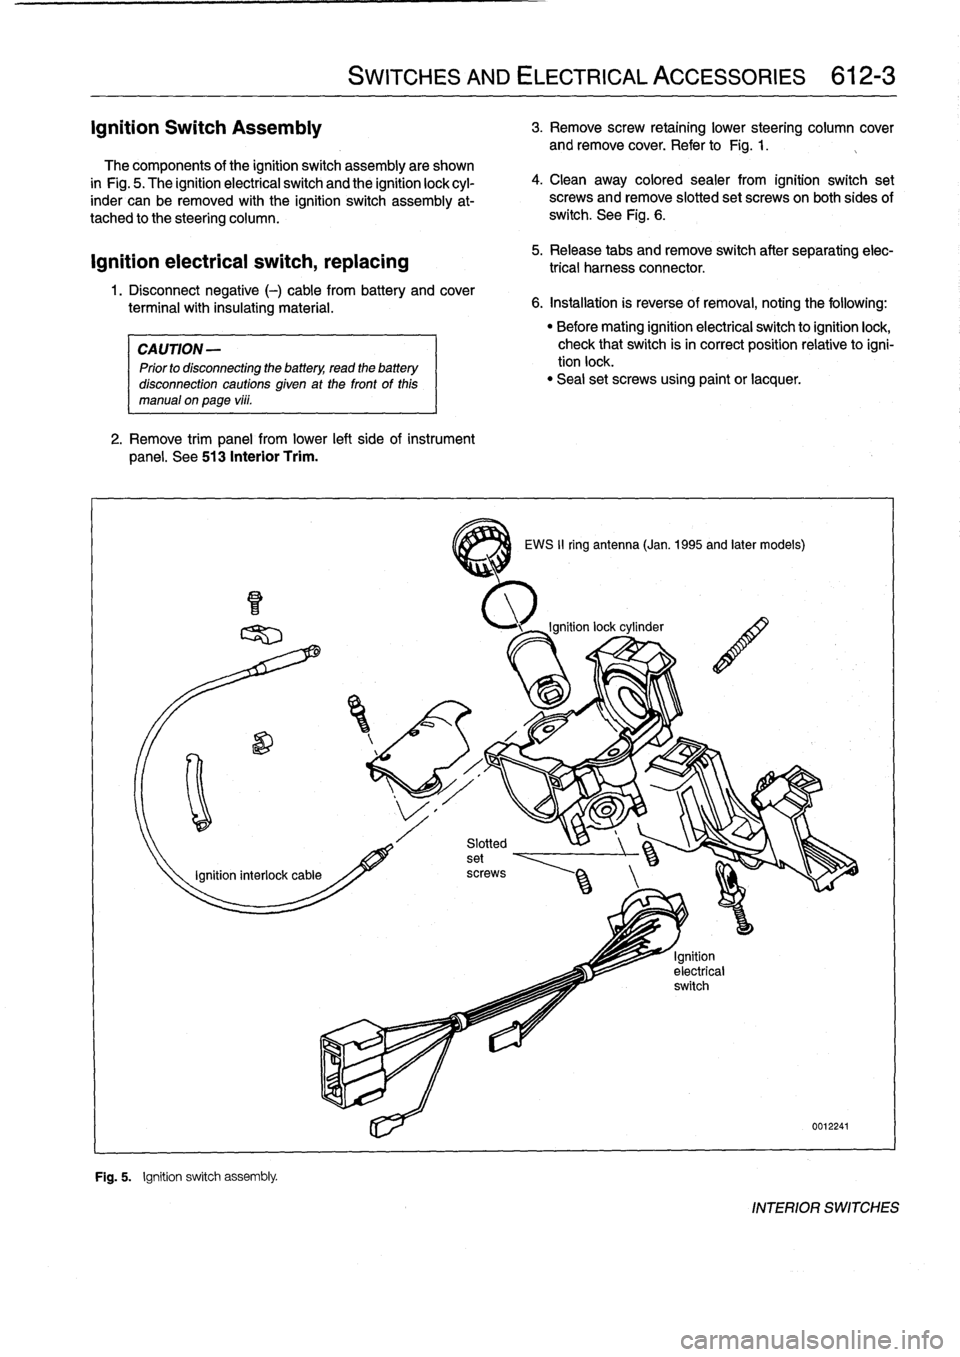 BMW 325i 1996 E36 Owners Manual 
Ignition
Switch
ASsembly

	

3
.
Remove
screw
retaining
lower
steering
column
cover
and
remove
cover
.
Refer
to
Fig
.
1
.

	

,

The
components
of
the
ignition
switch
assembly
are
shown

in
Fig
.
5
.